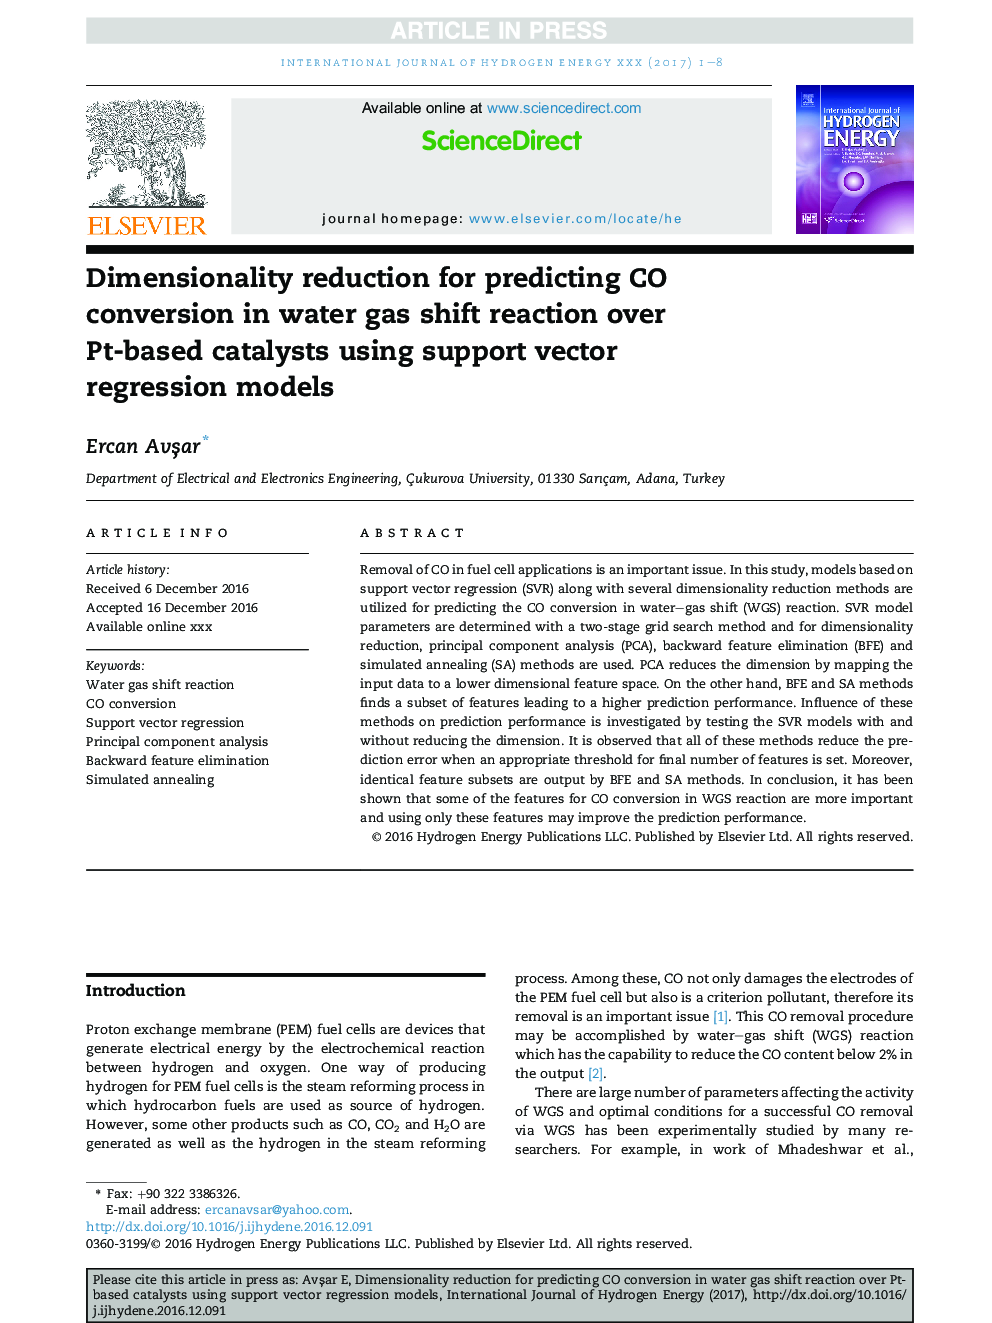 Dimensionality reduction for predicting CO conversion in water gas shift reaction over Pt-based catalysts using support vector regression models